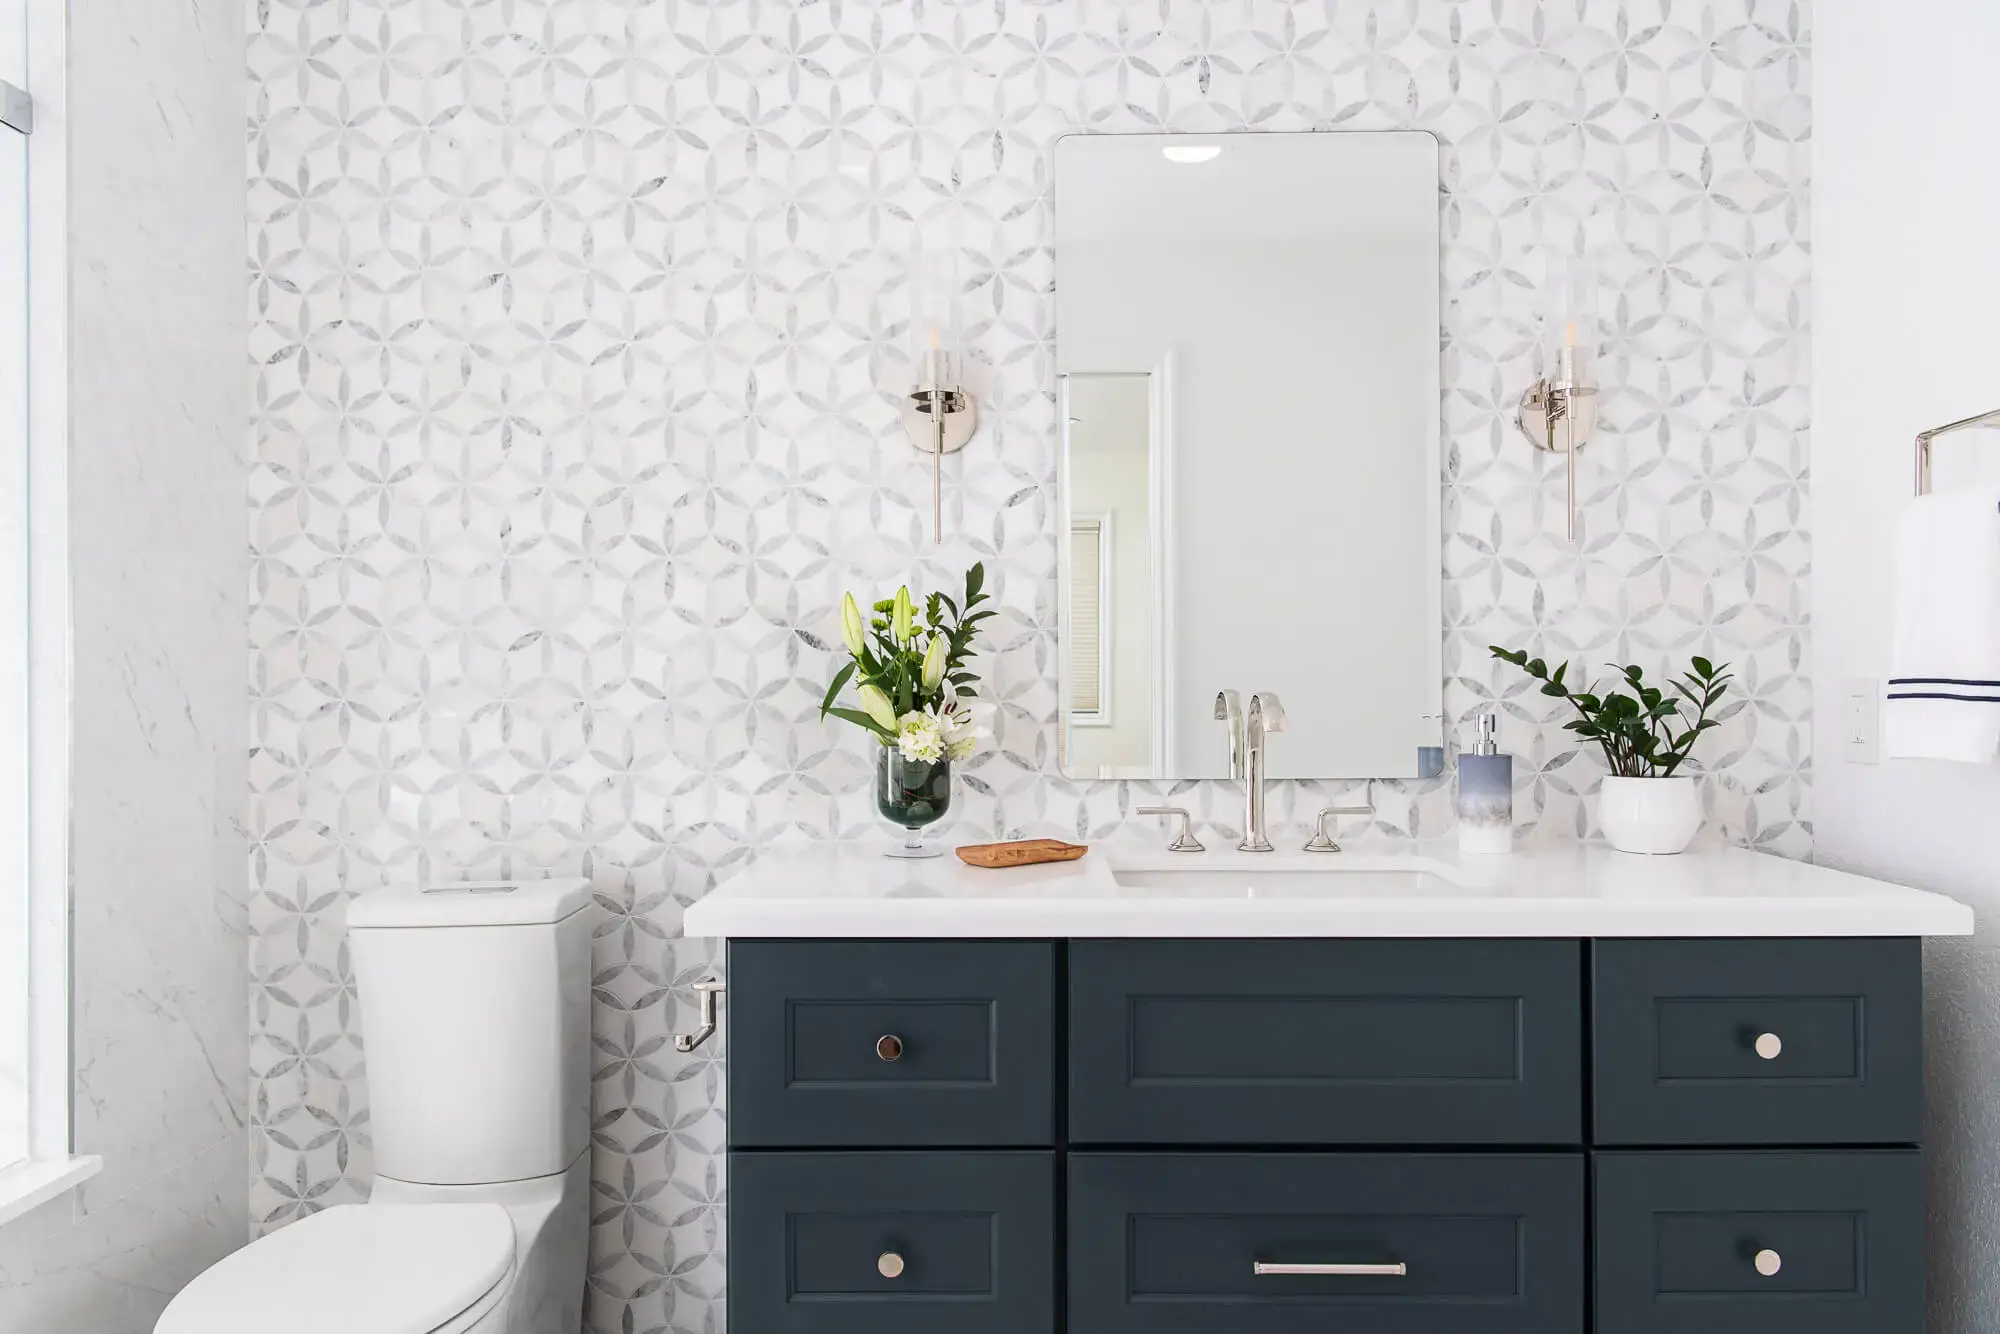 A unique tile design is an innovative bathroom remodeling idea that elevates the overall design.